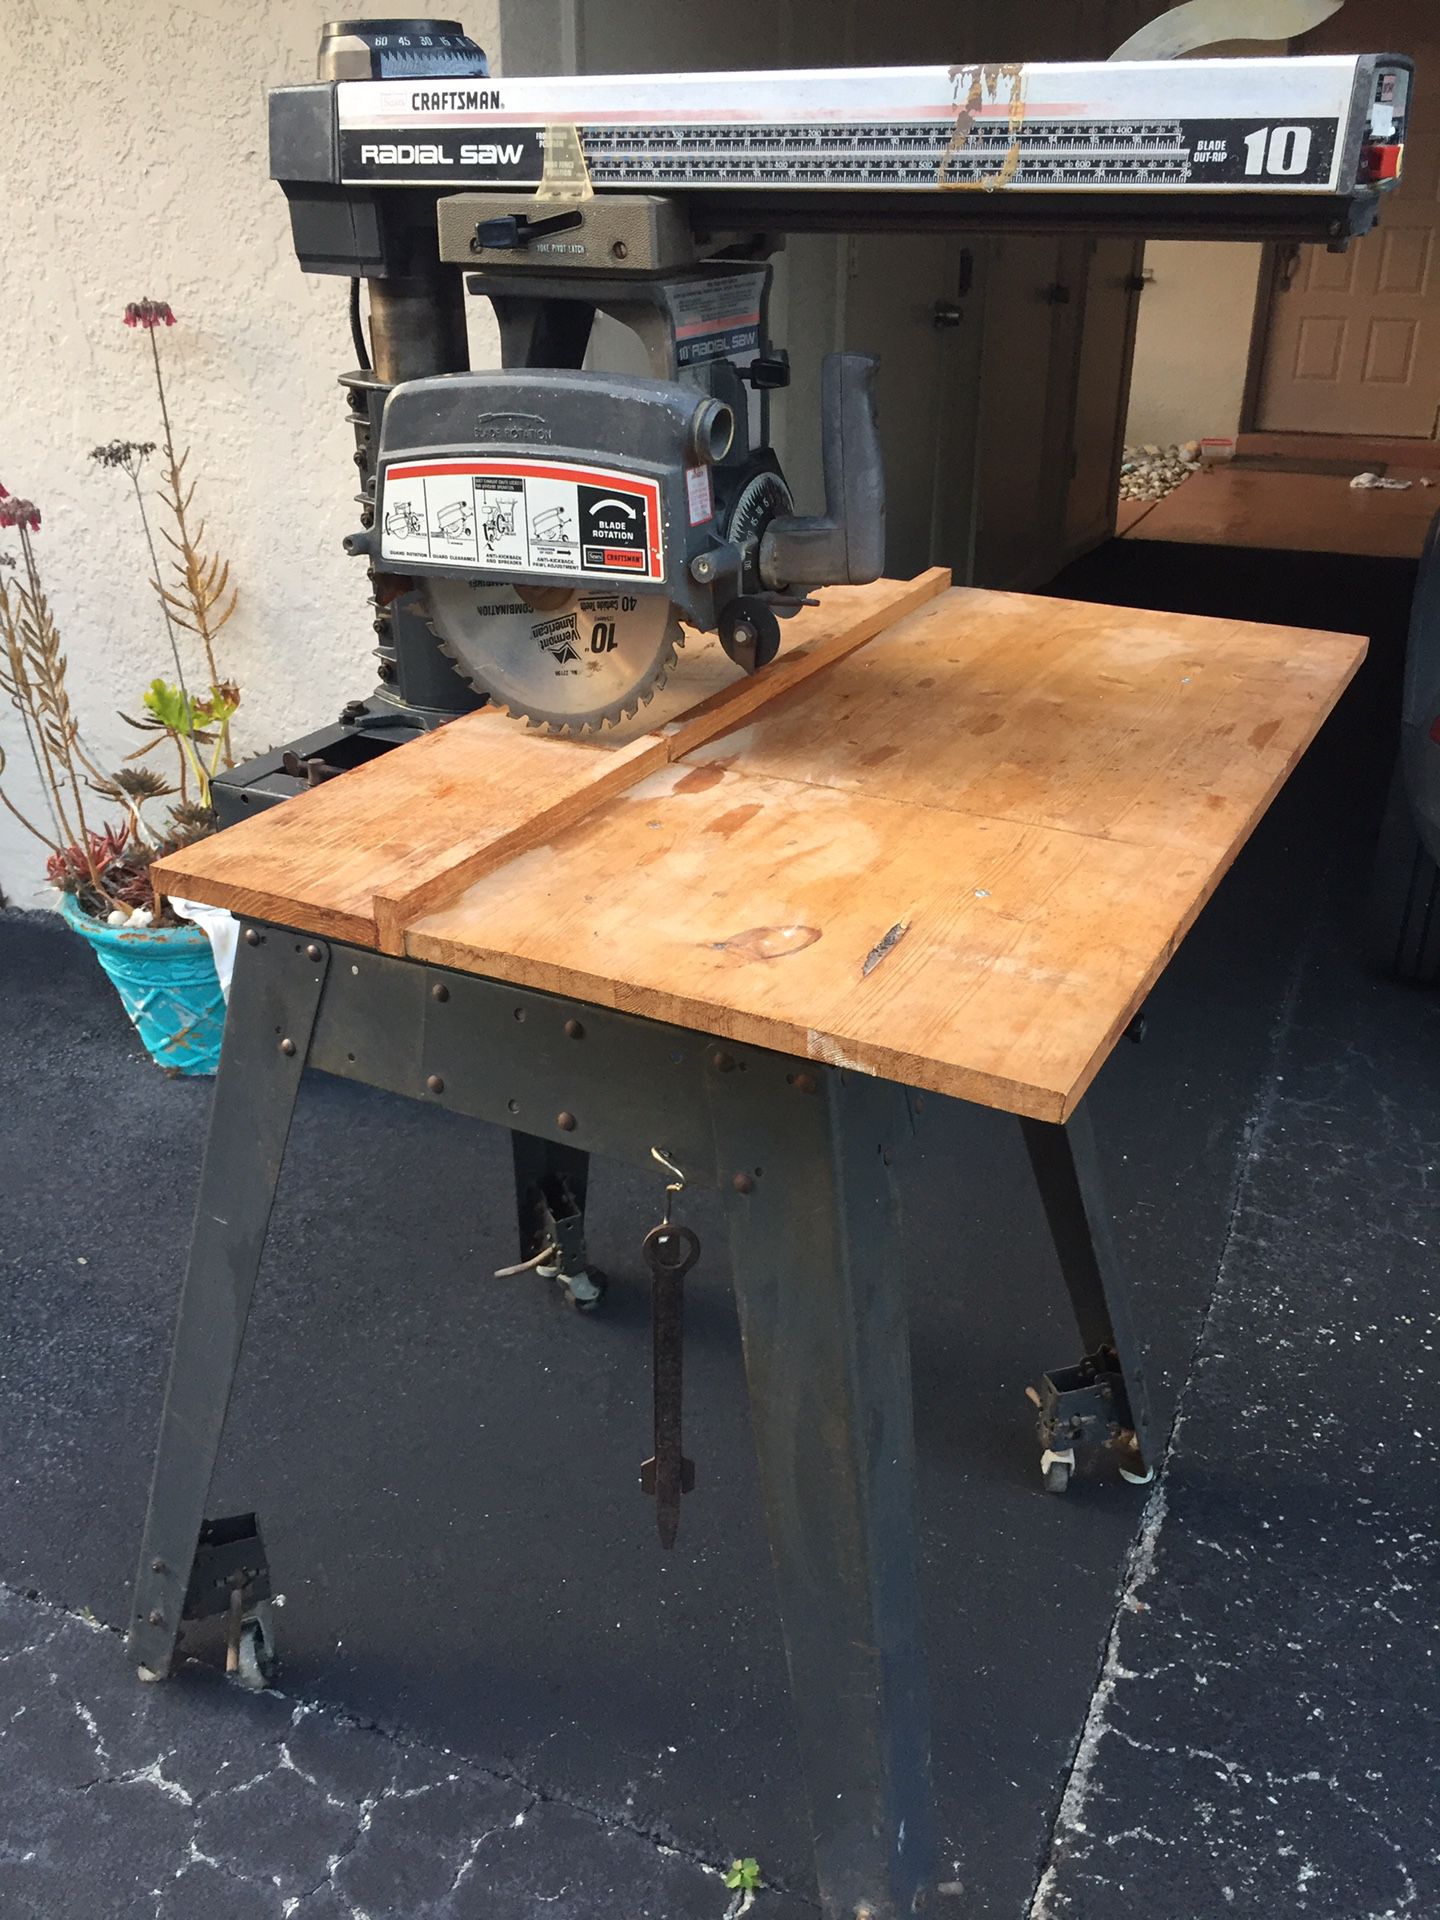 Craftsman 10" inch Radial Arm Saw with Table